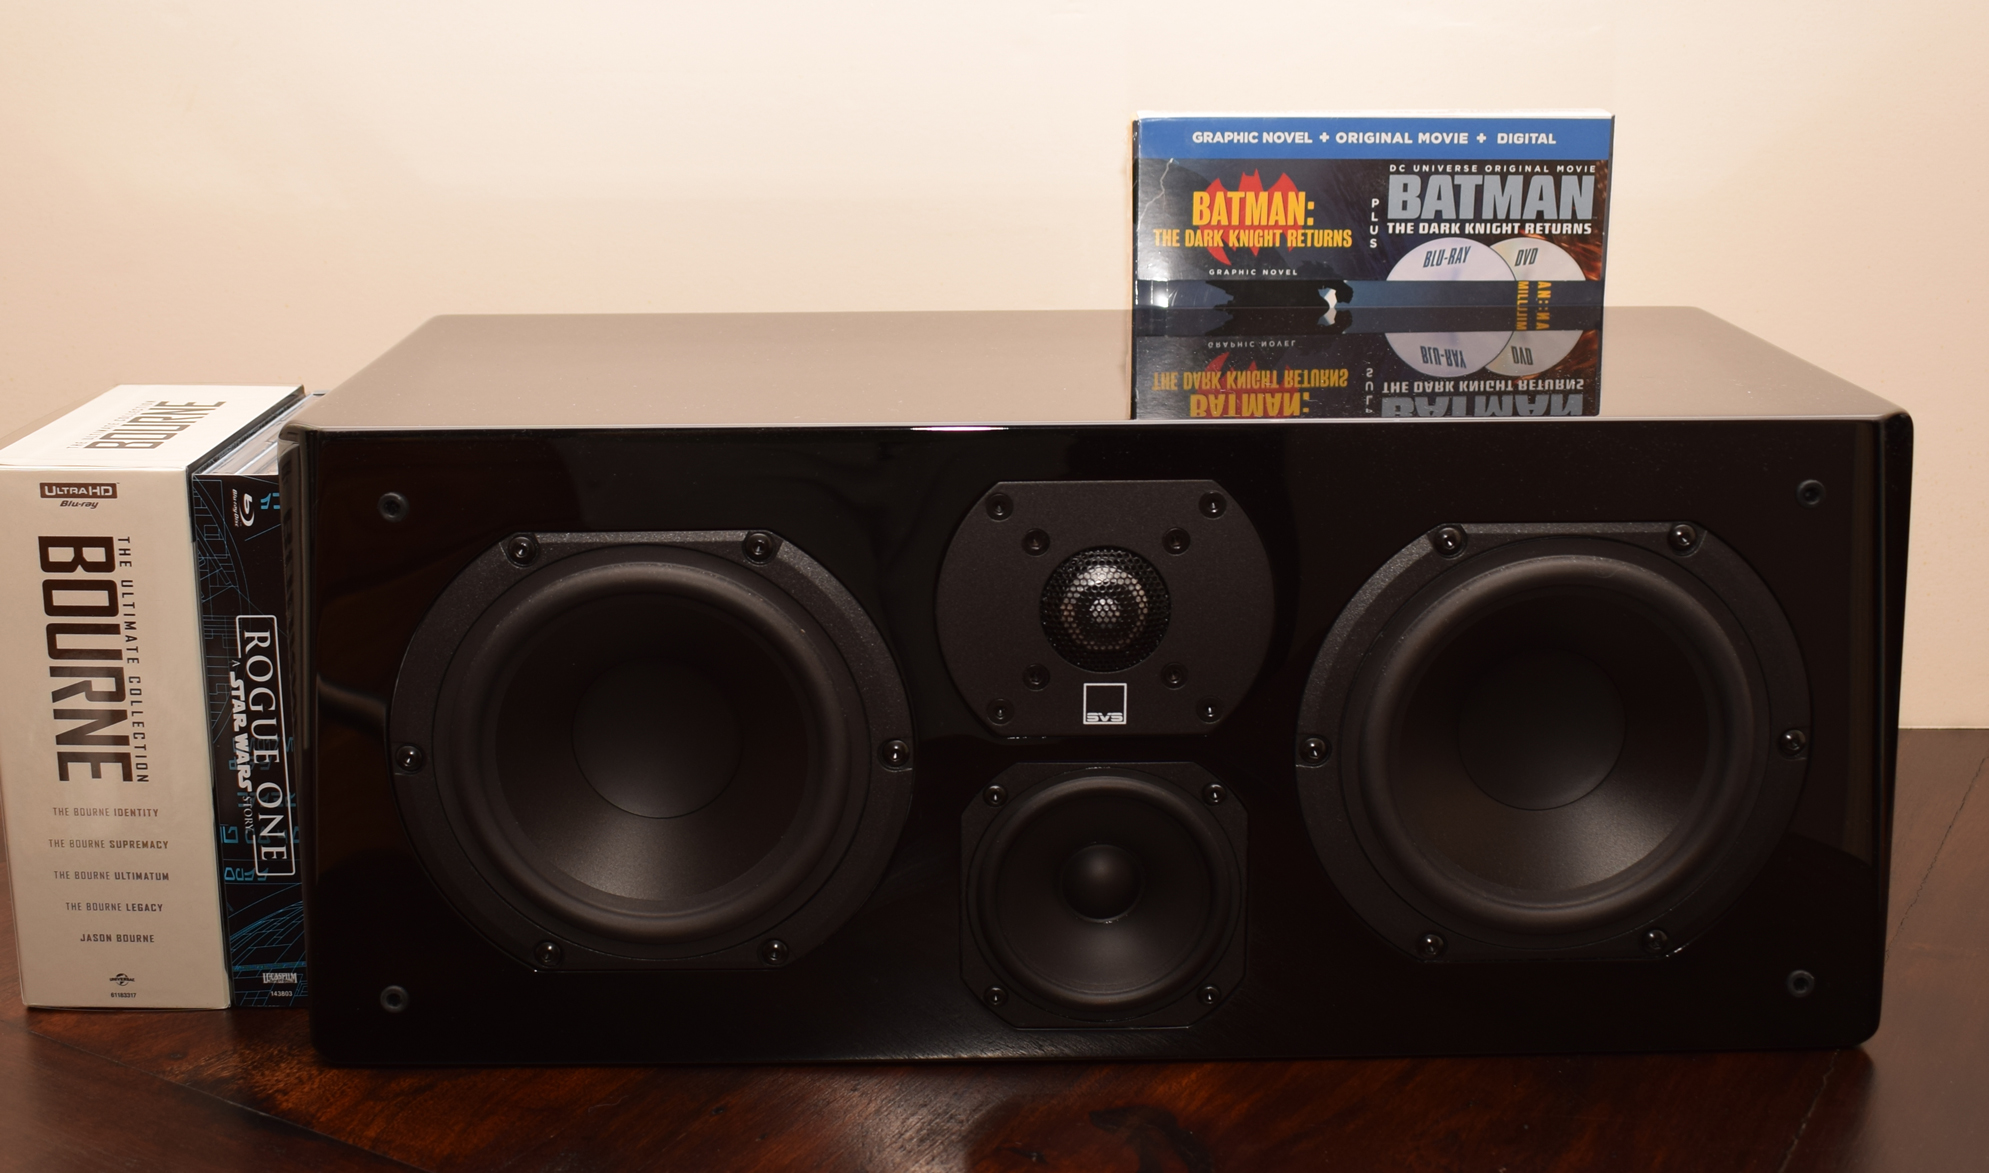 SVS Prime Center Speaker Review - Without Screen - Rogue One, Bourne, Dark Knight Returns Collection